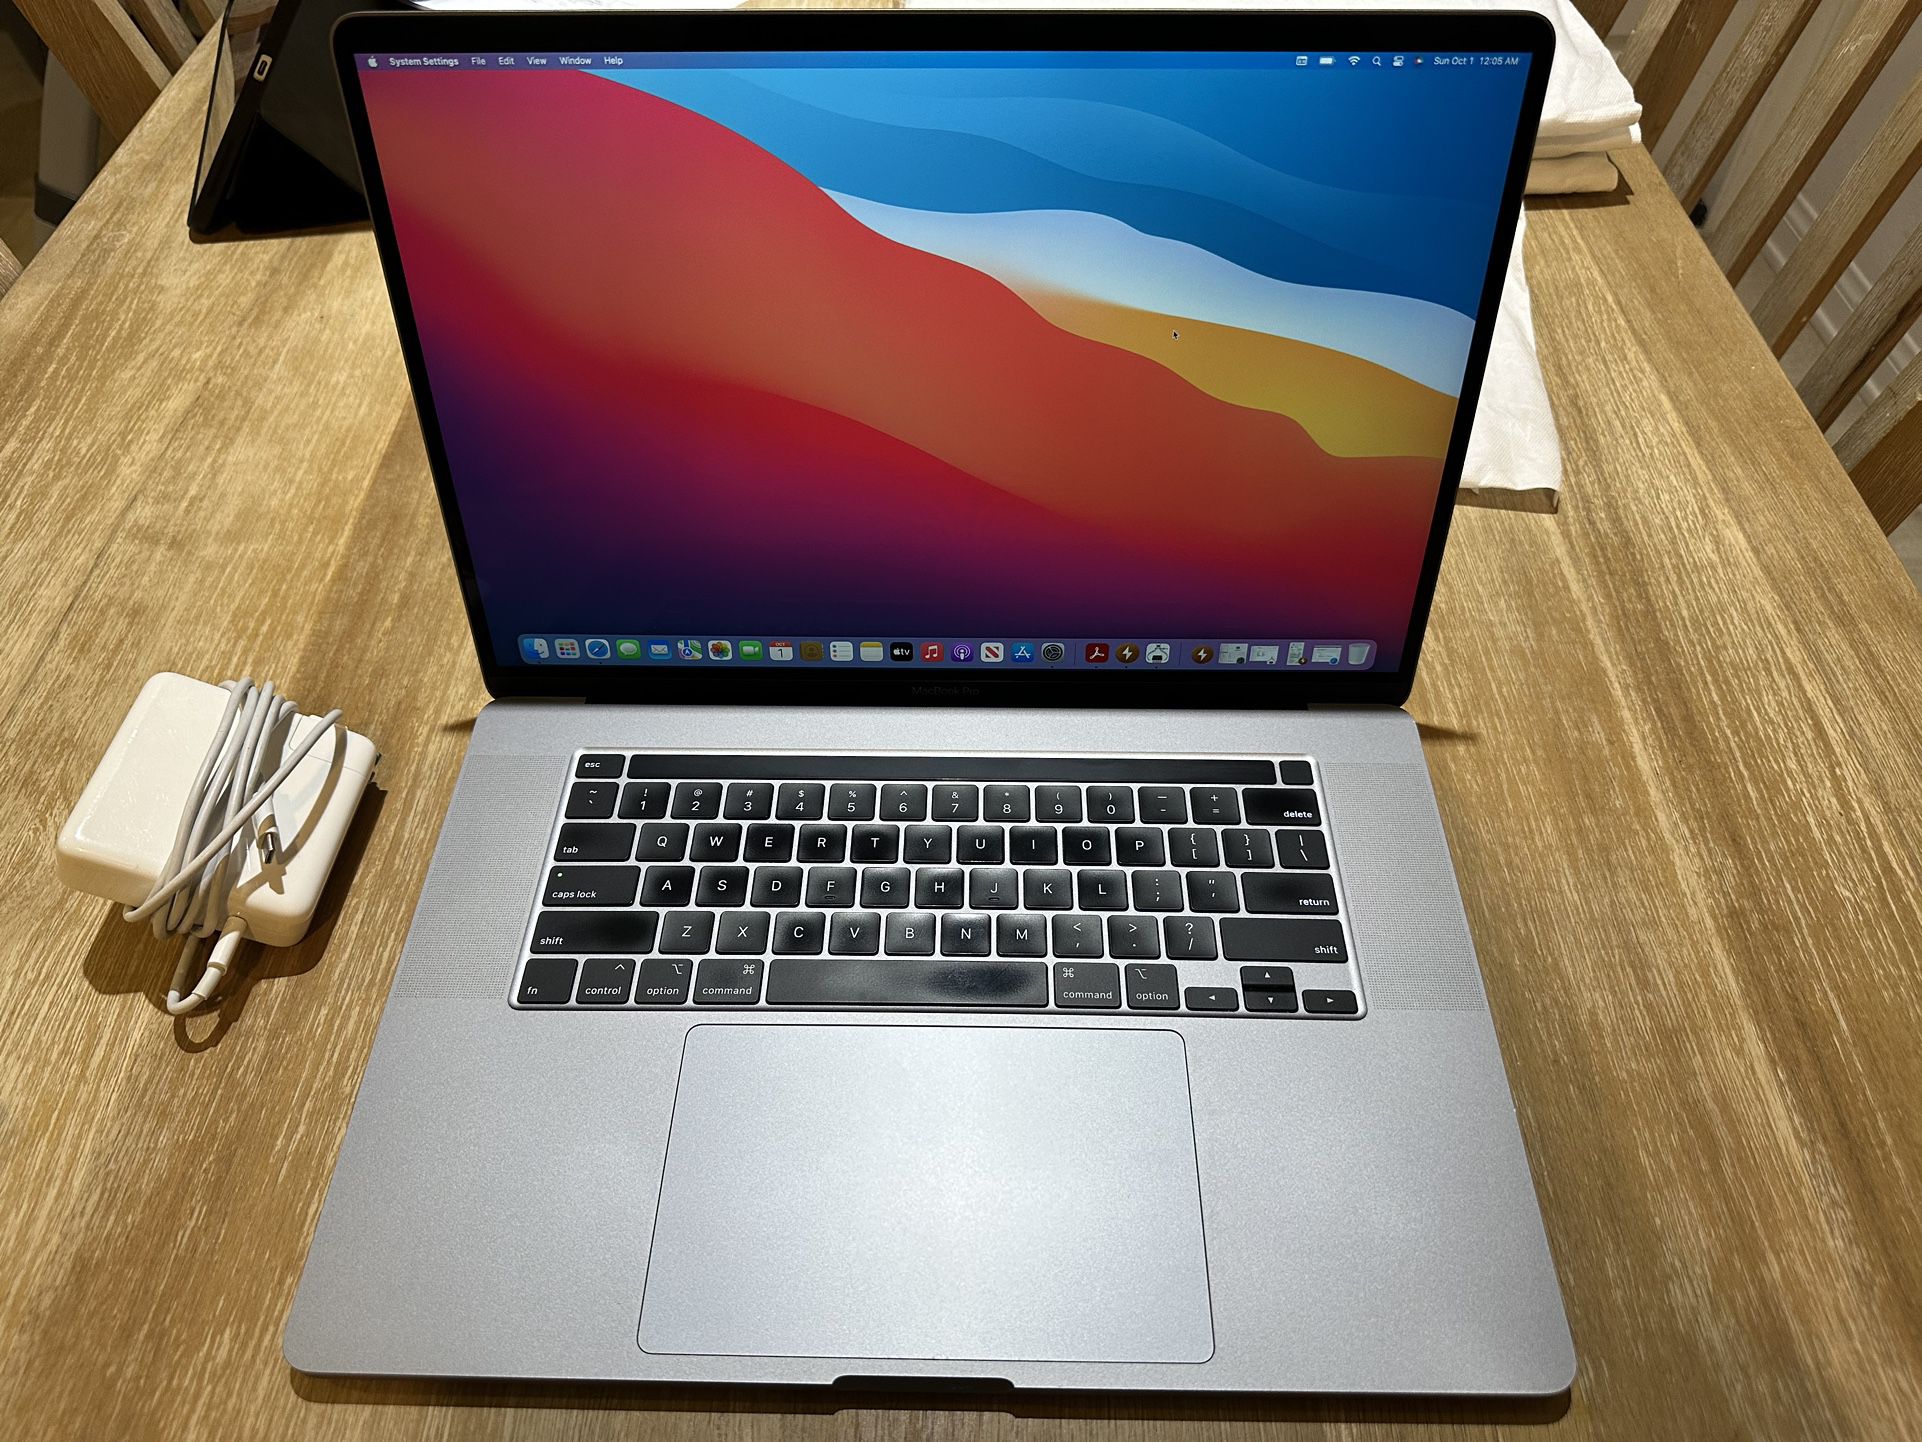 2019 /2020 MacBook Pro 16”, i9 8cores 2.4ghz,16gb ram,512gb.4GB graphic.65 Battery Cycles,Fast